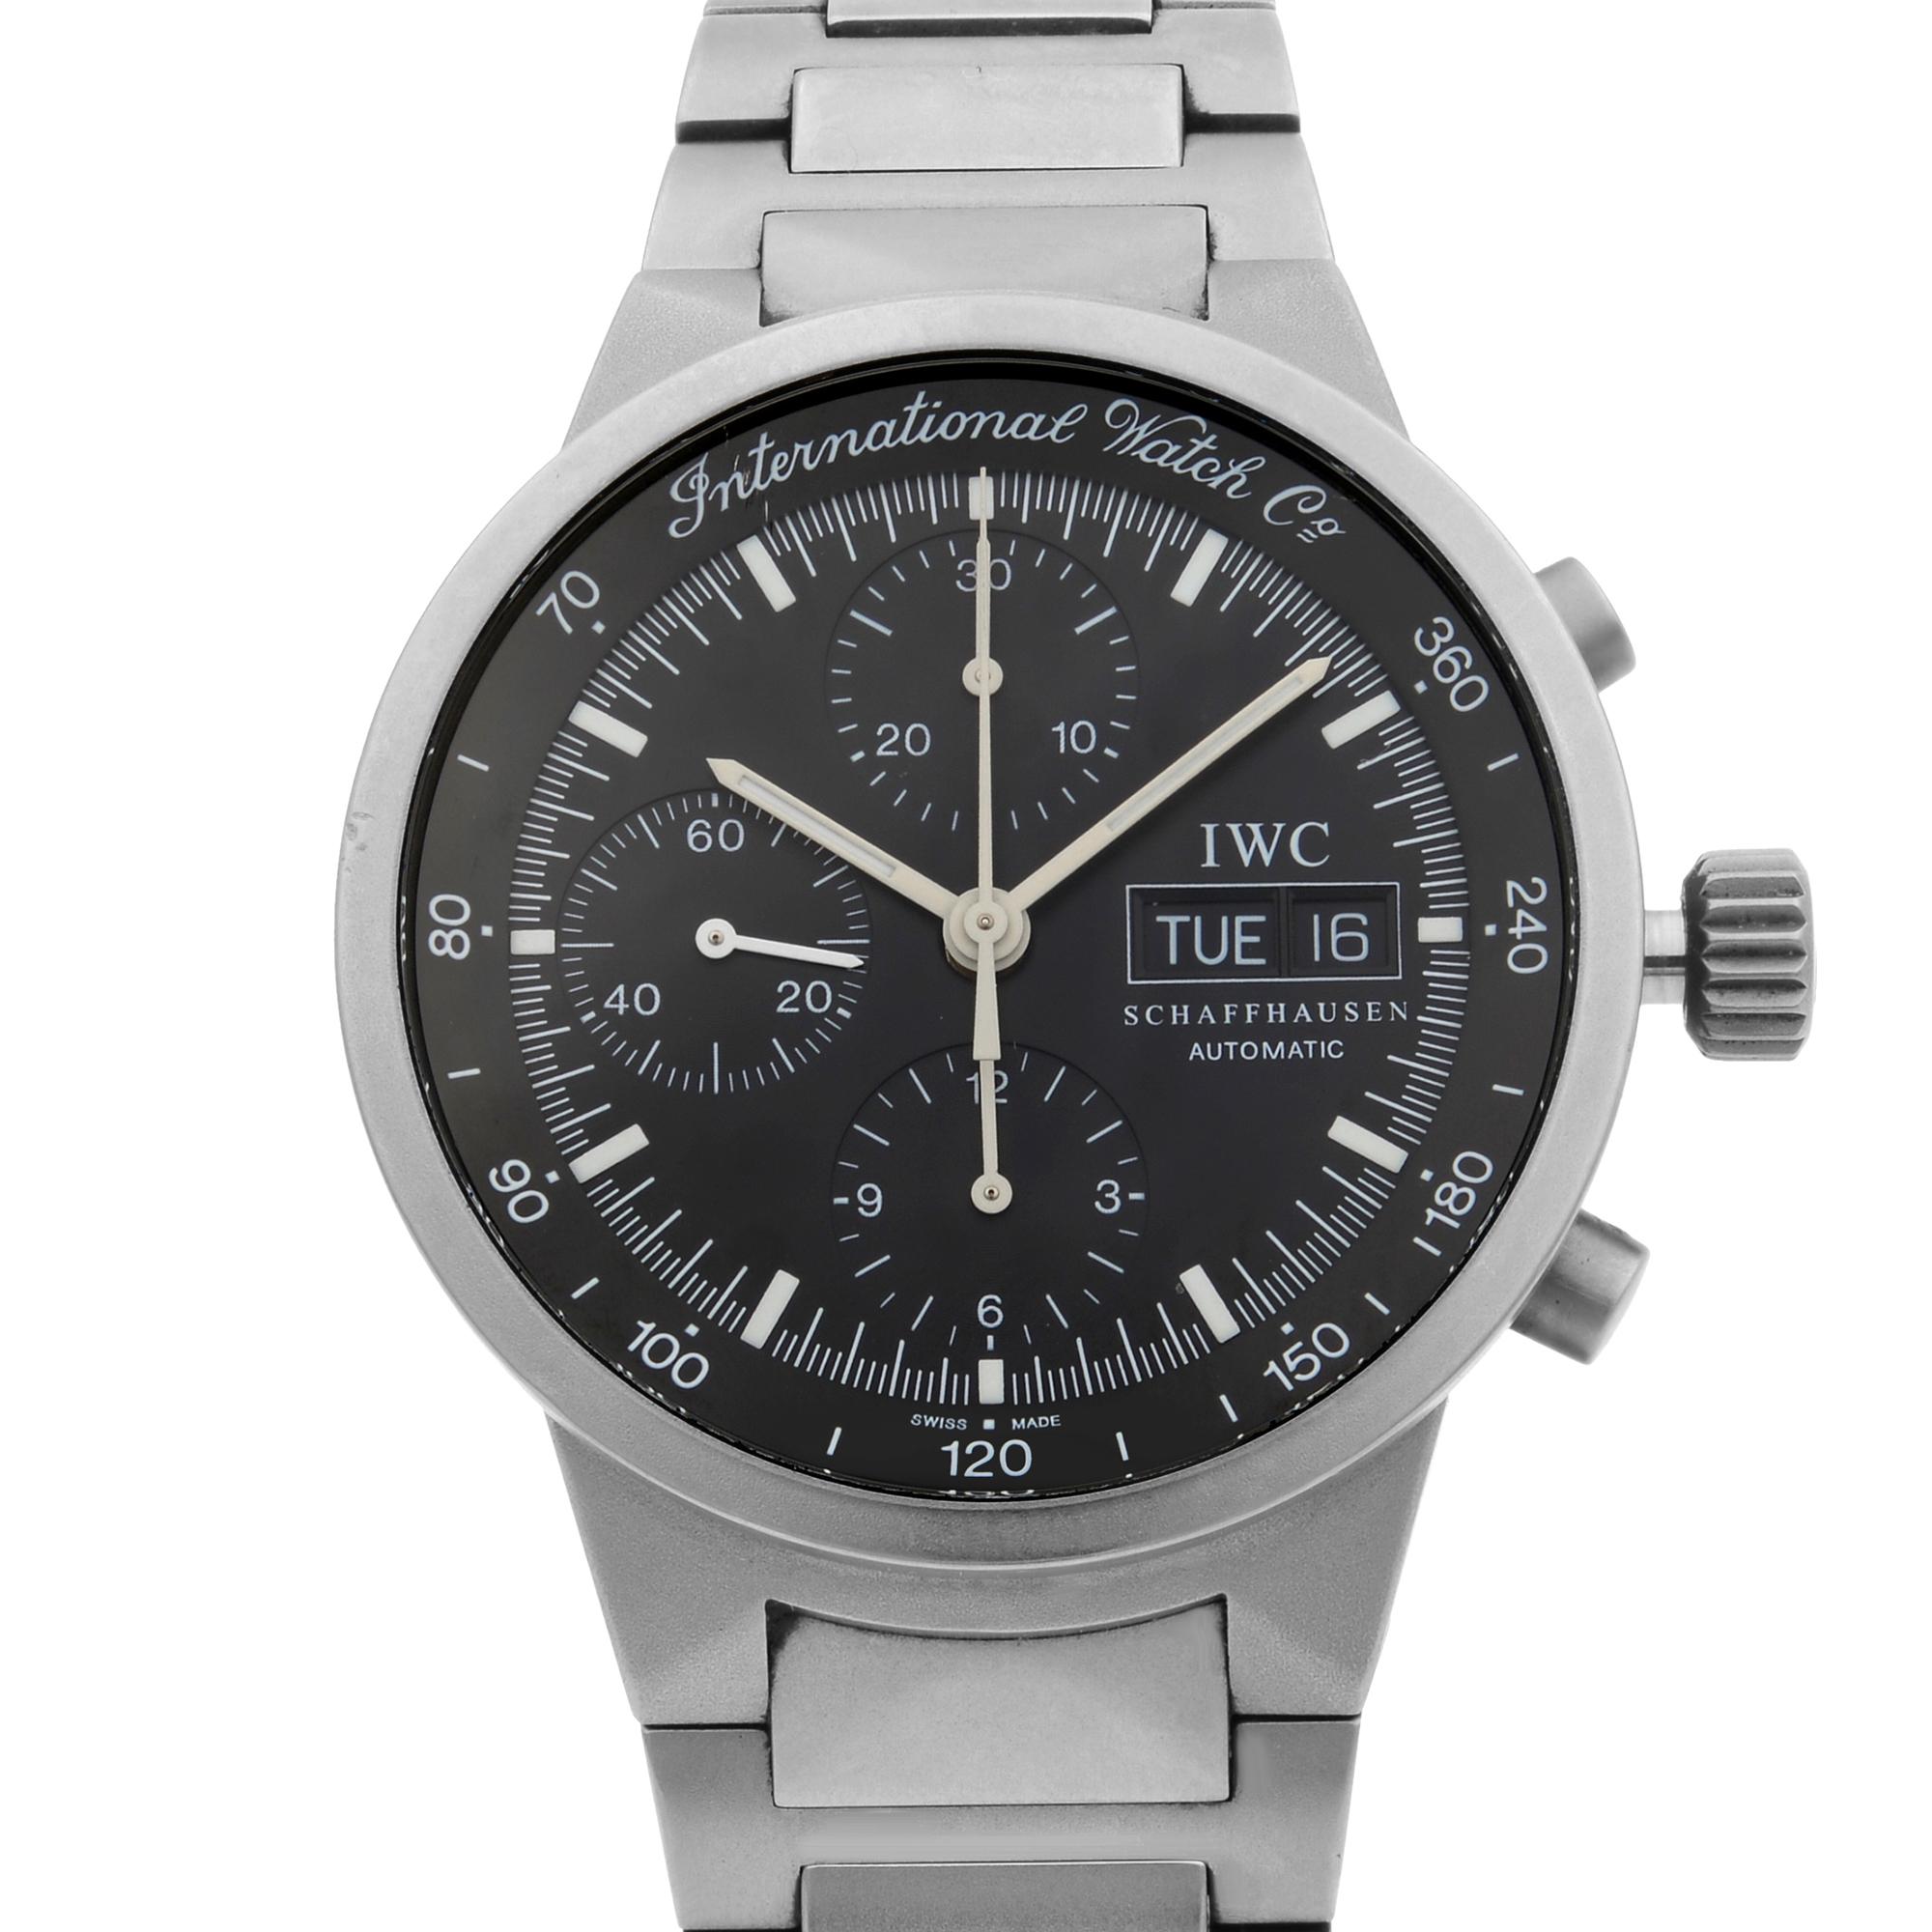 This pre-owned IWC GST IW3707-03 is a beautiful men's timepiece that is powered by mechanical (automatic) movement which is cased in a titanium case. It has a round shape face, day indicator, chronograph, chronograph hand, date indicator, small